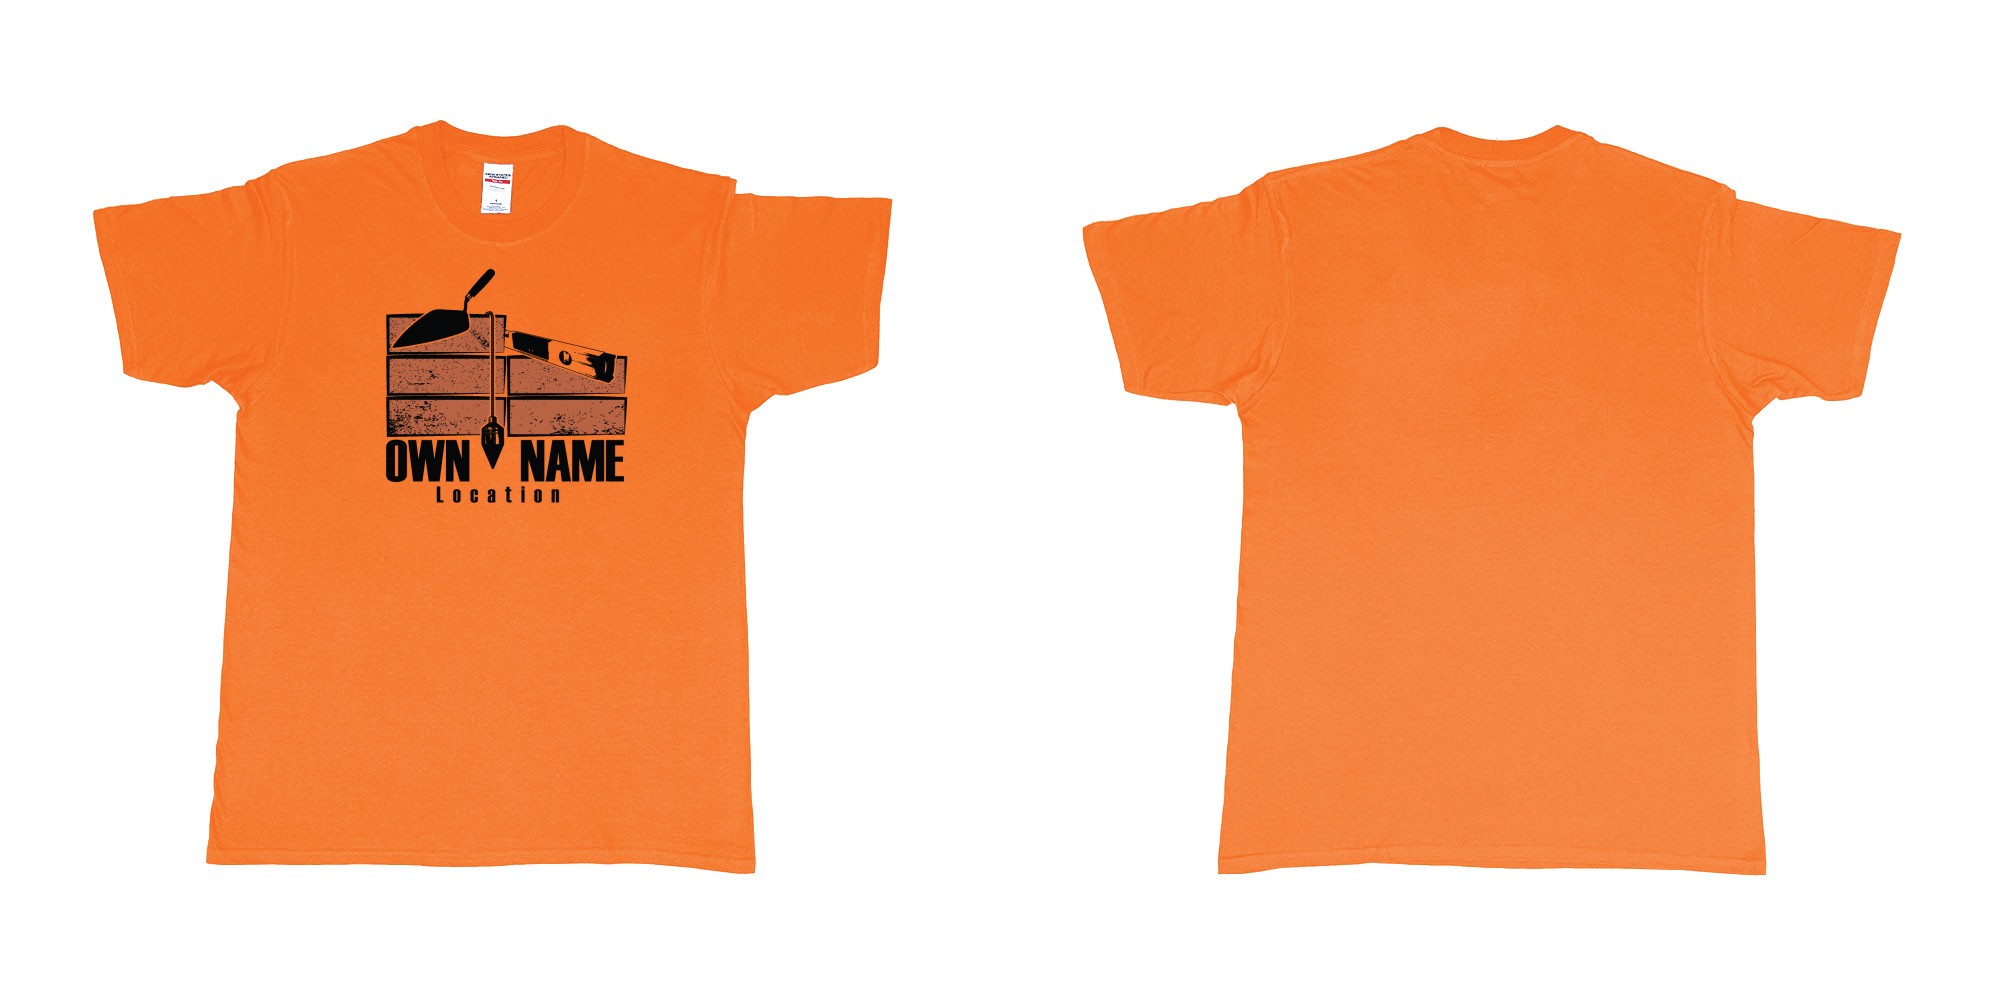 Custom tshirt design brick layer builder own custom company printing name location trowel in fabric color orange choice your own text made in Bali by The Pirate Way